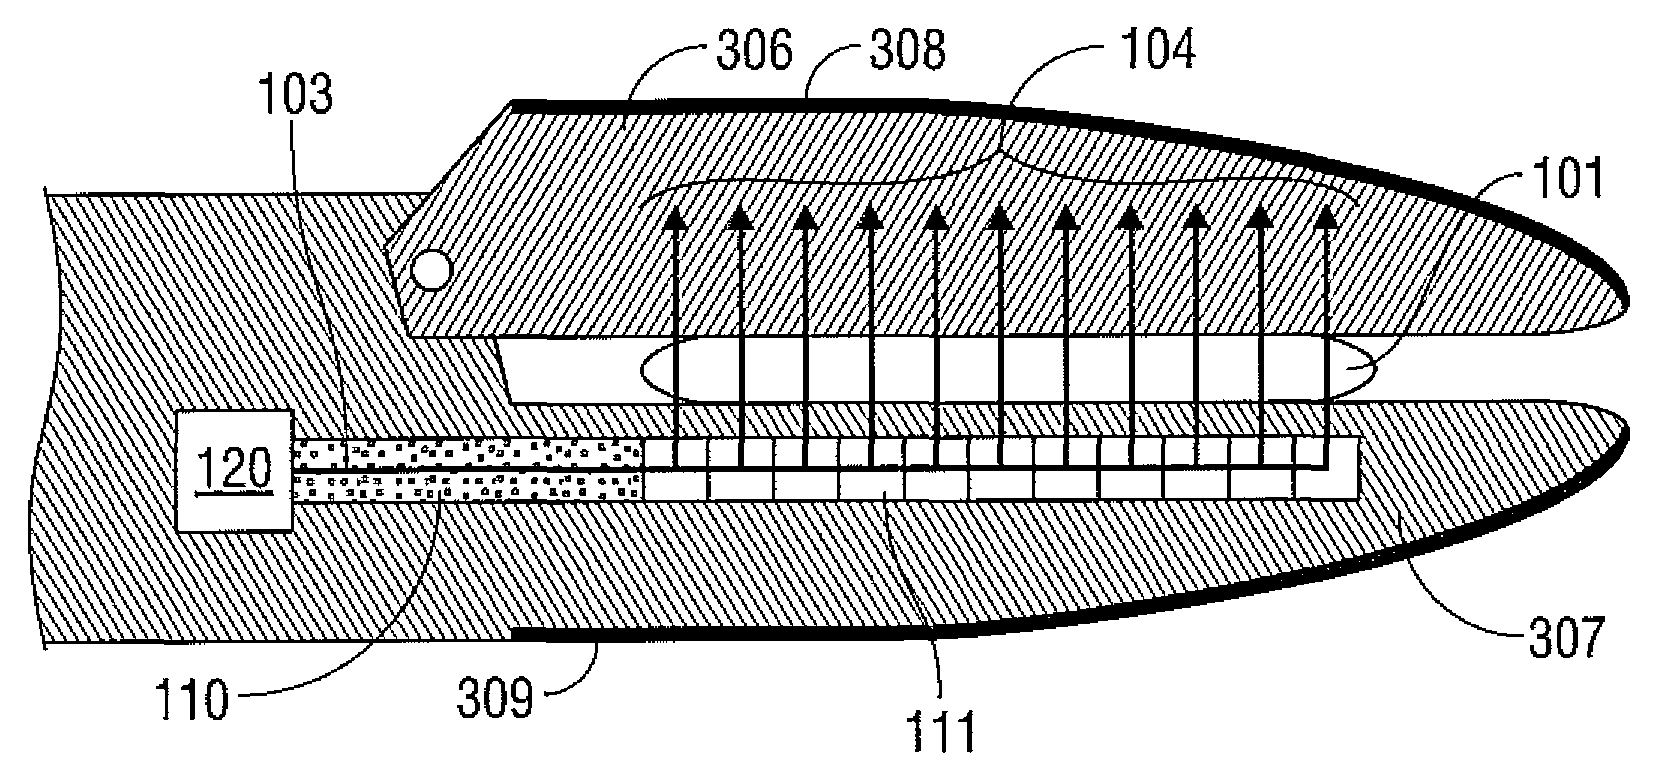 Optical energy-based methods and apparatus for tissue sealing